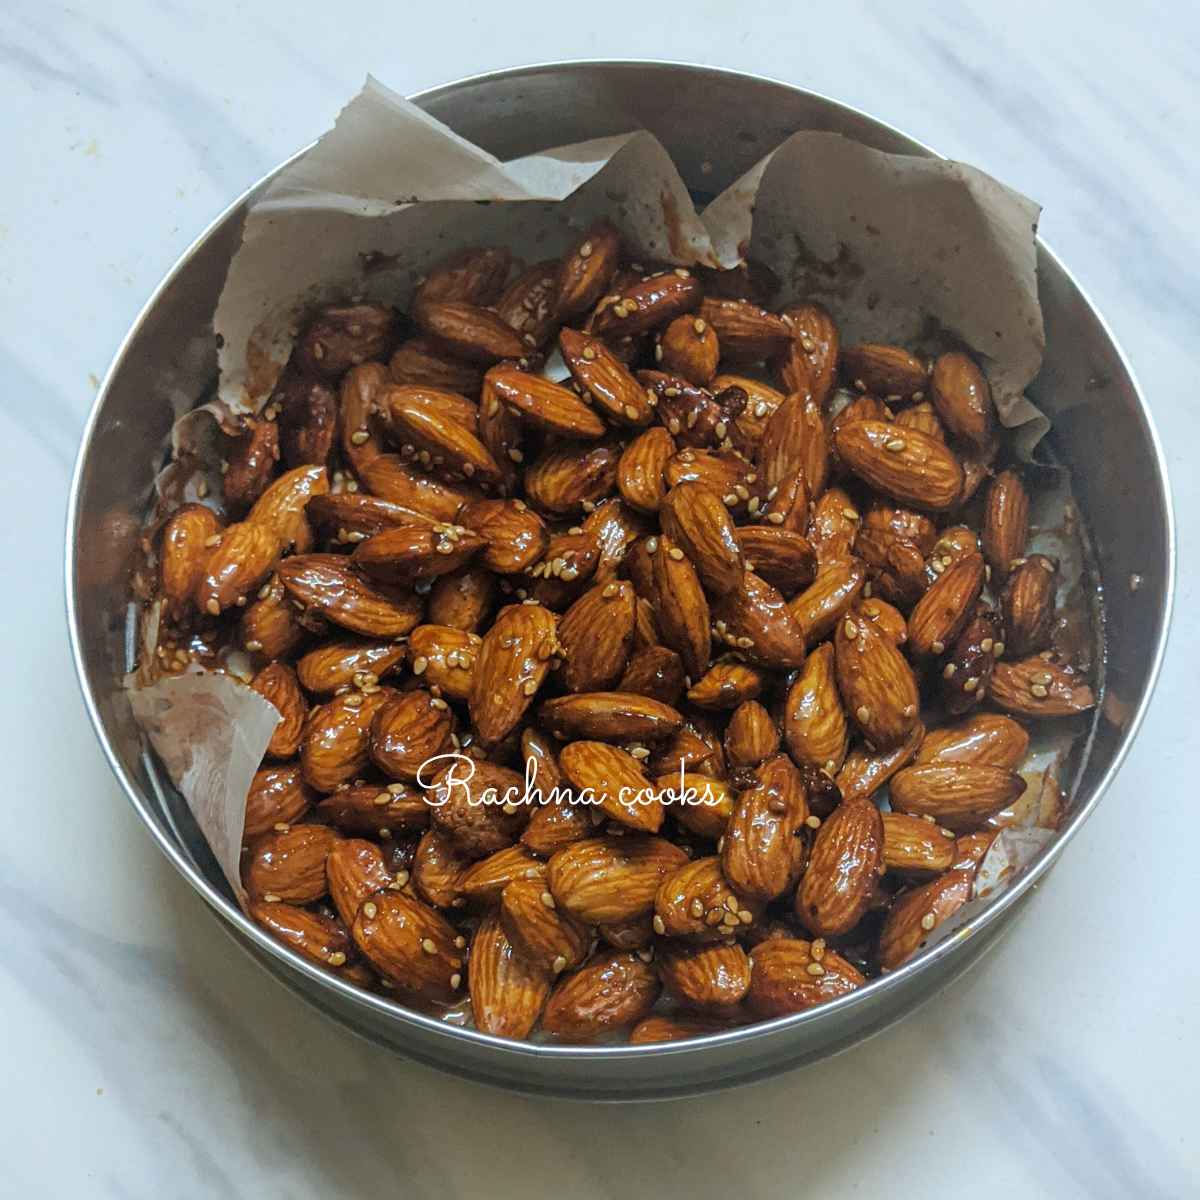 Honey Roasted Almonds {Oven or Air Fryer} - Cook it Real Good